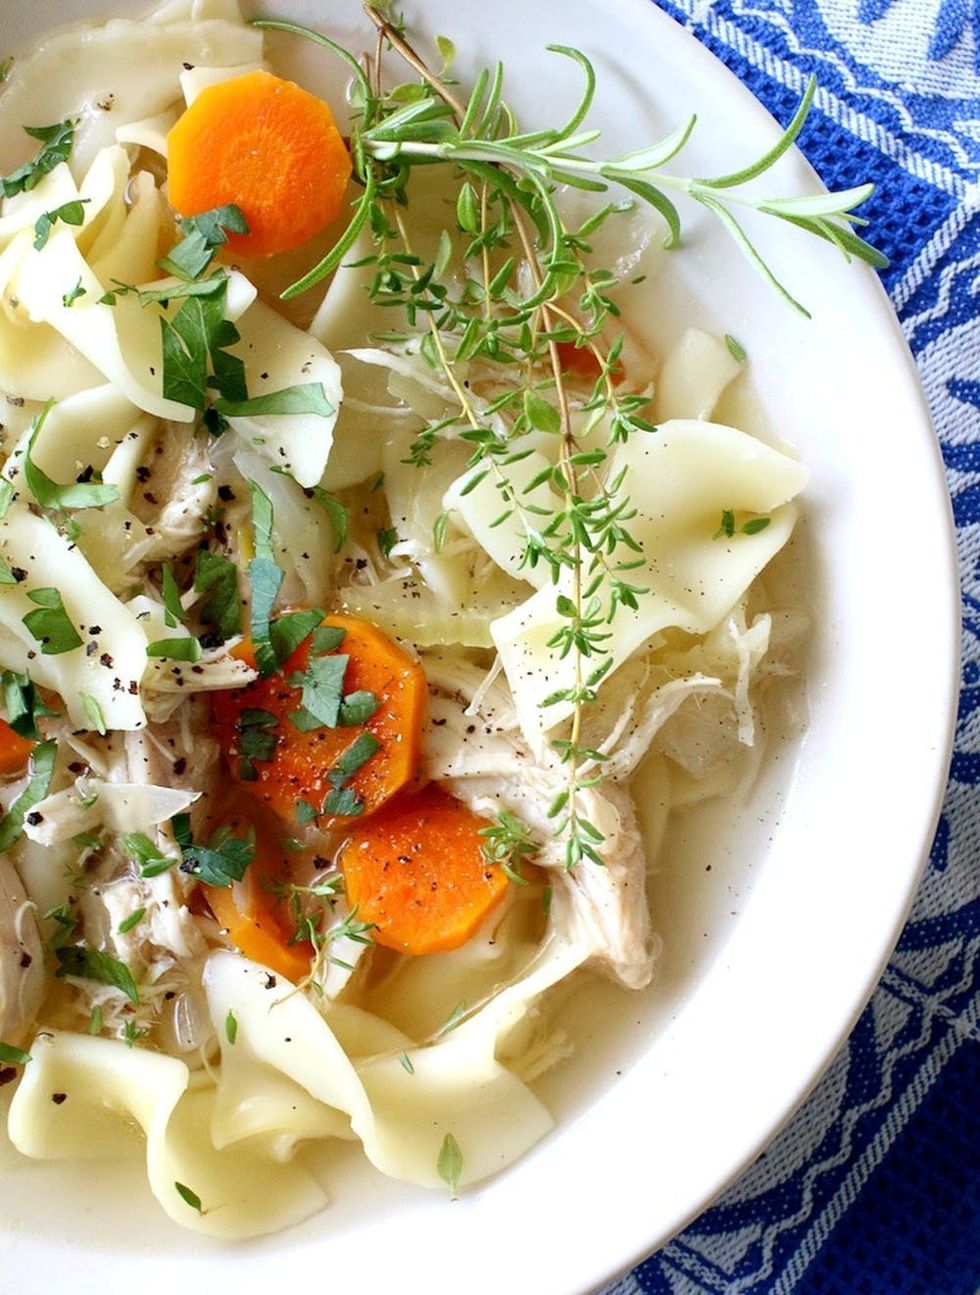 Slow-Cooker Chicken Noodle Soup